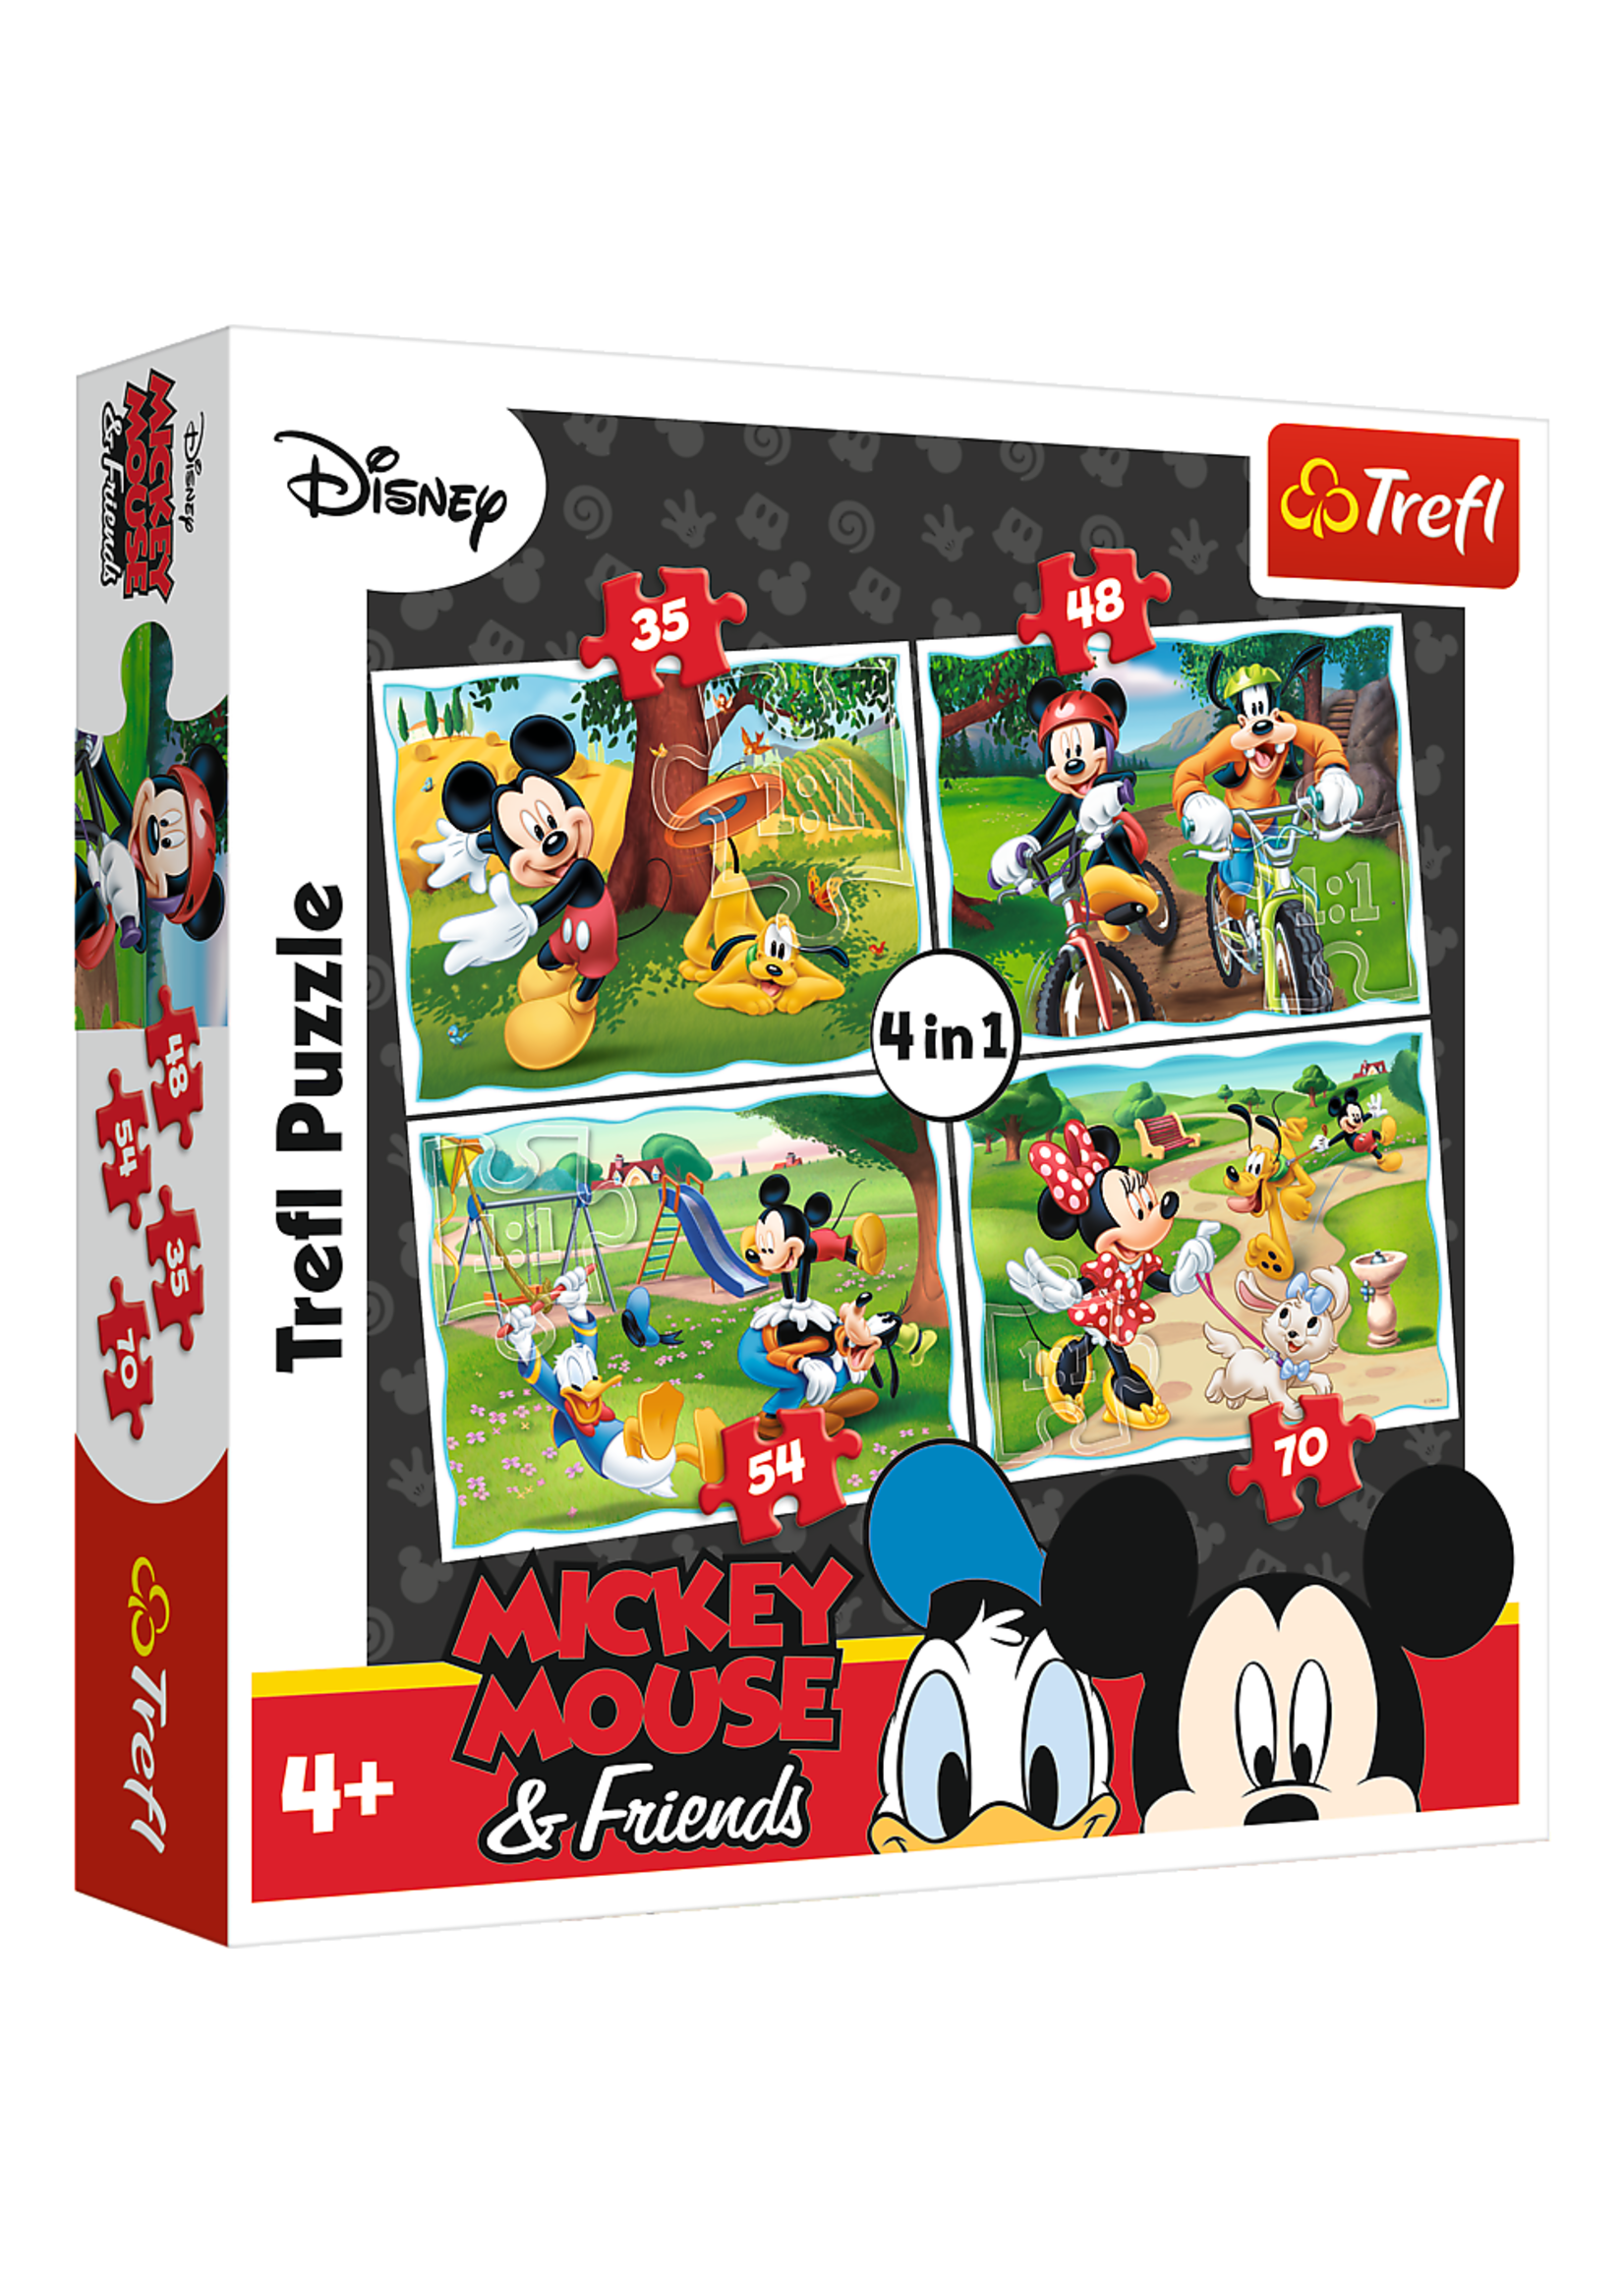 Disney Mickey Mouse 4 in 1 puzzle from Disney